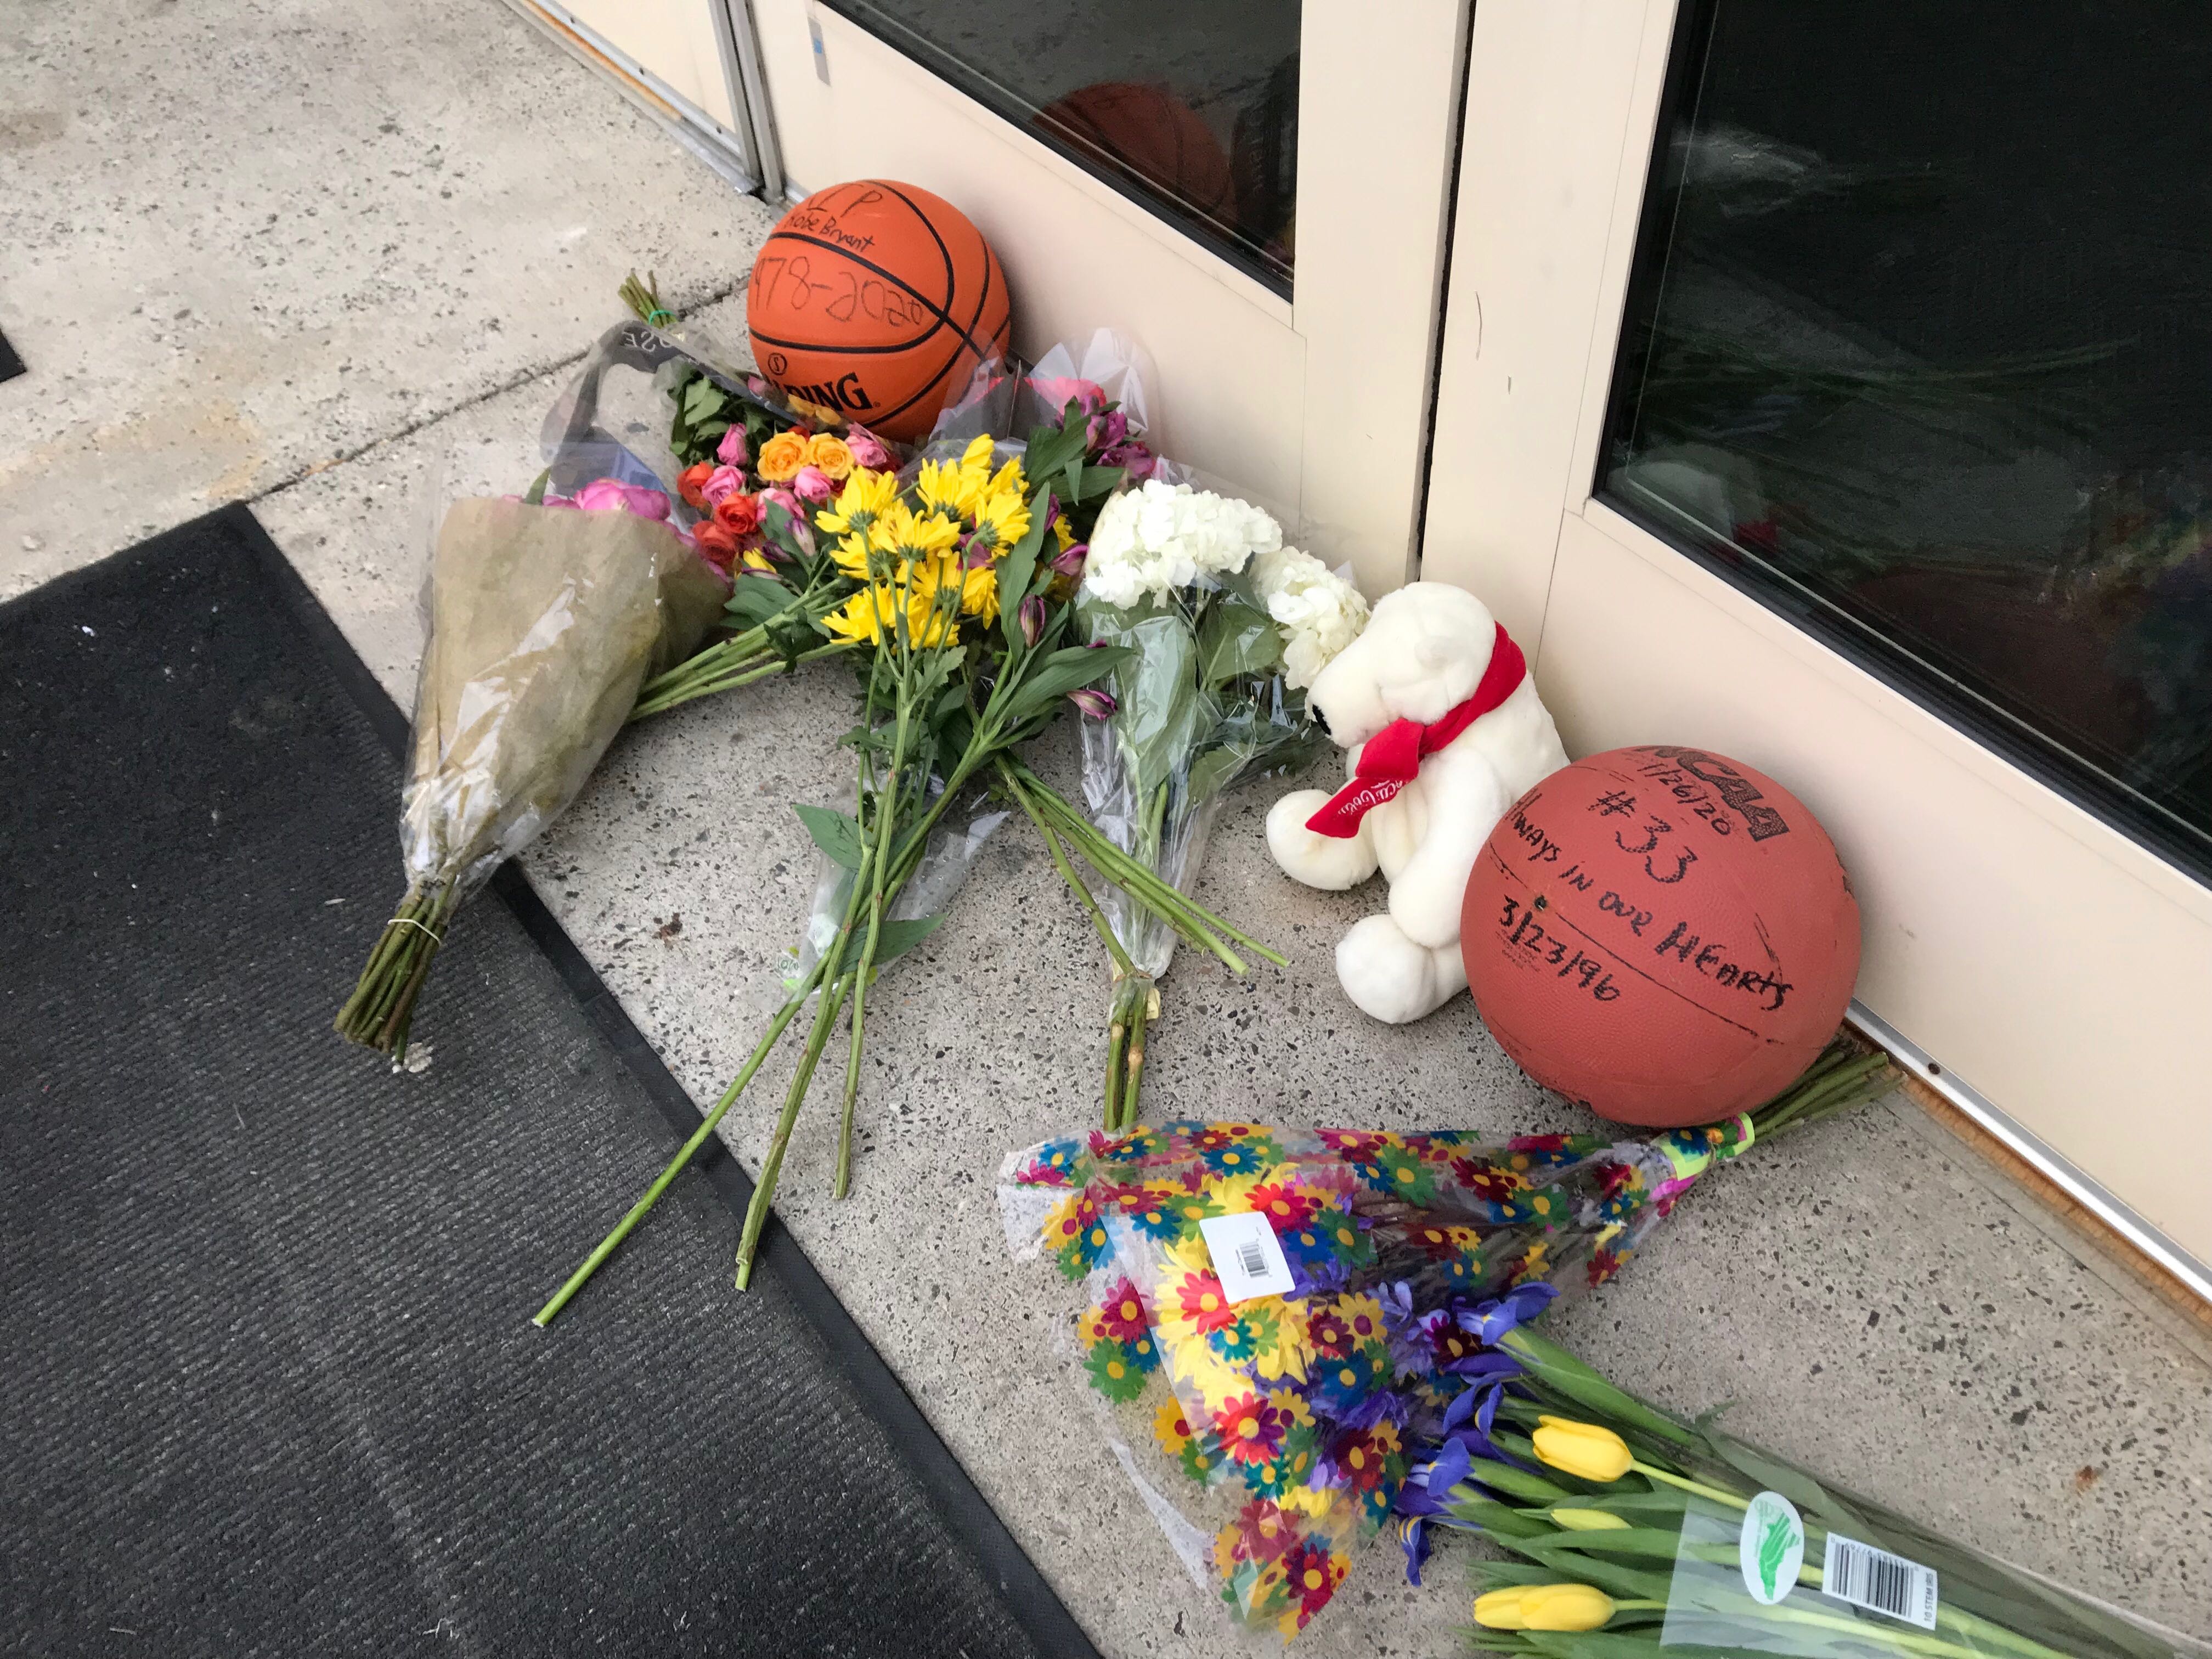 Kobe Bryant's stolen jersey finds its way home as Lower Merion